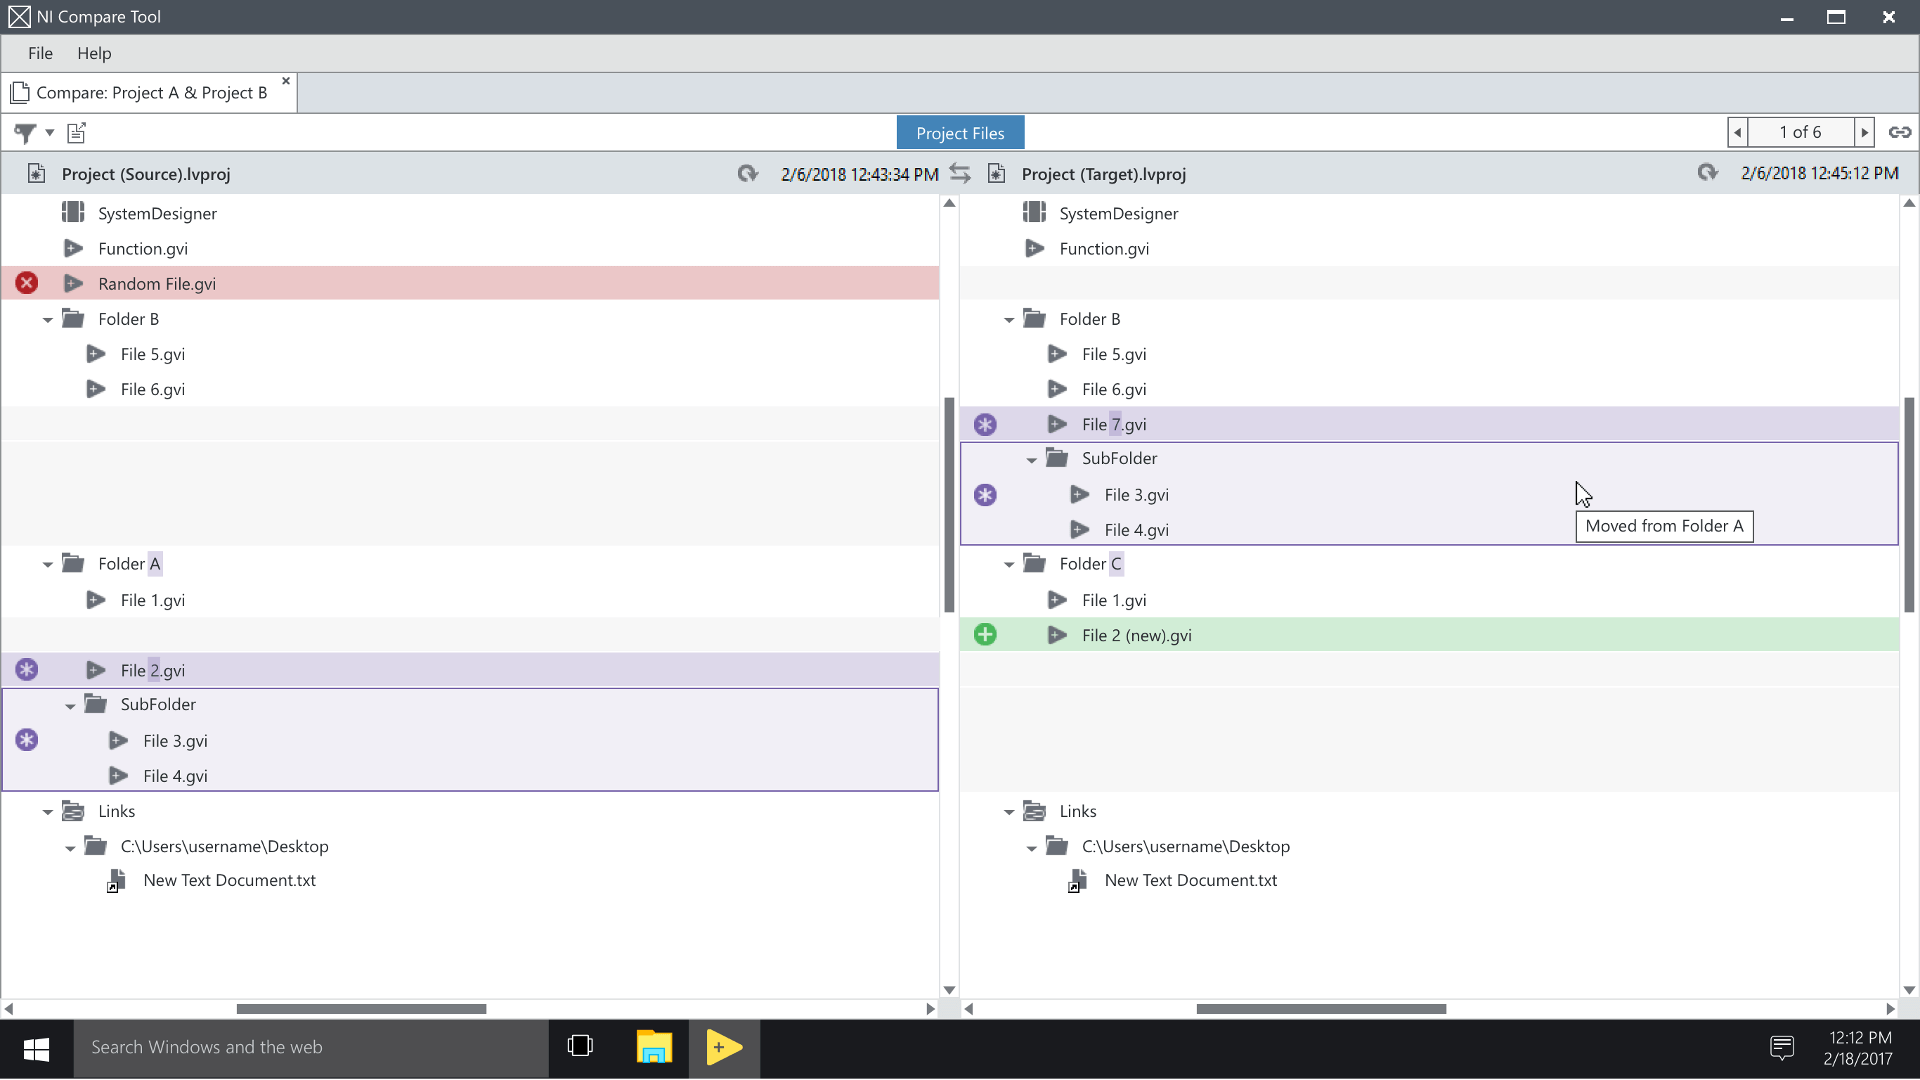 a high fidelity mockup of a project with folders being compared, plus mouseover micro-interactions displayed